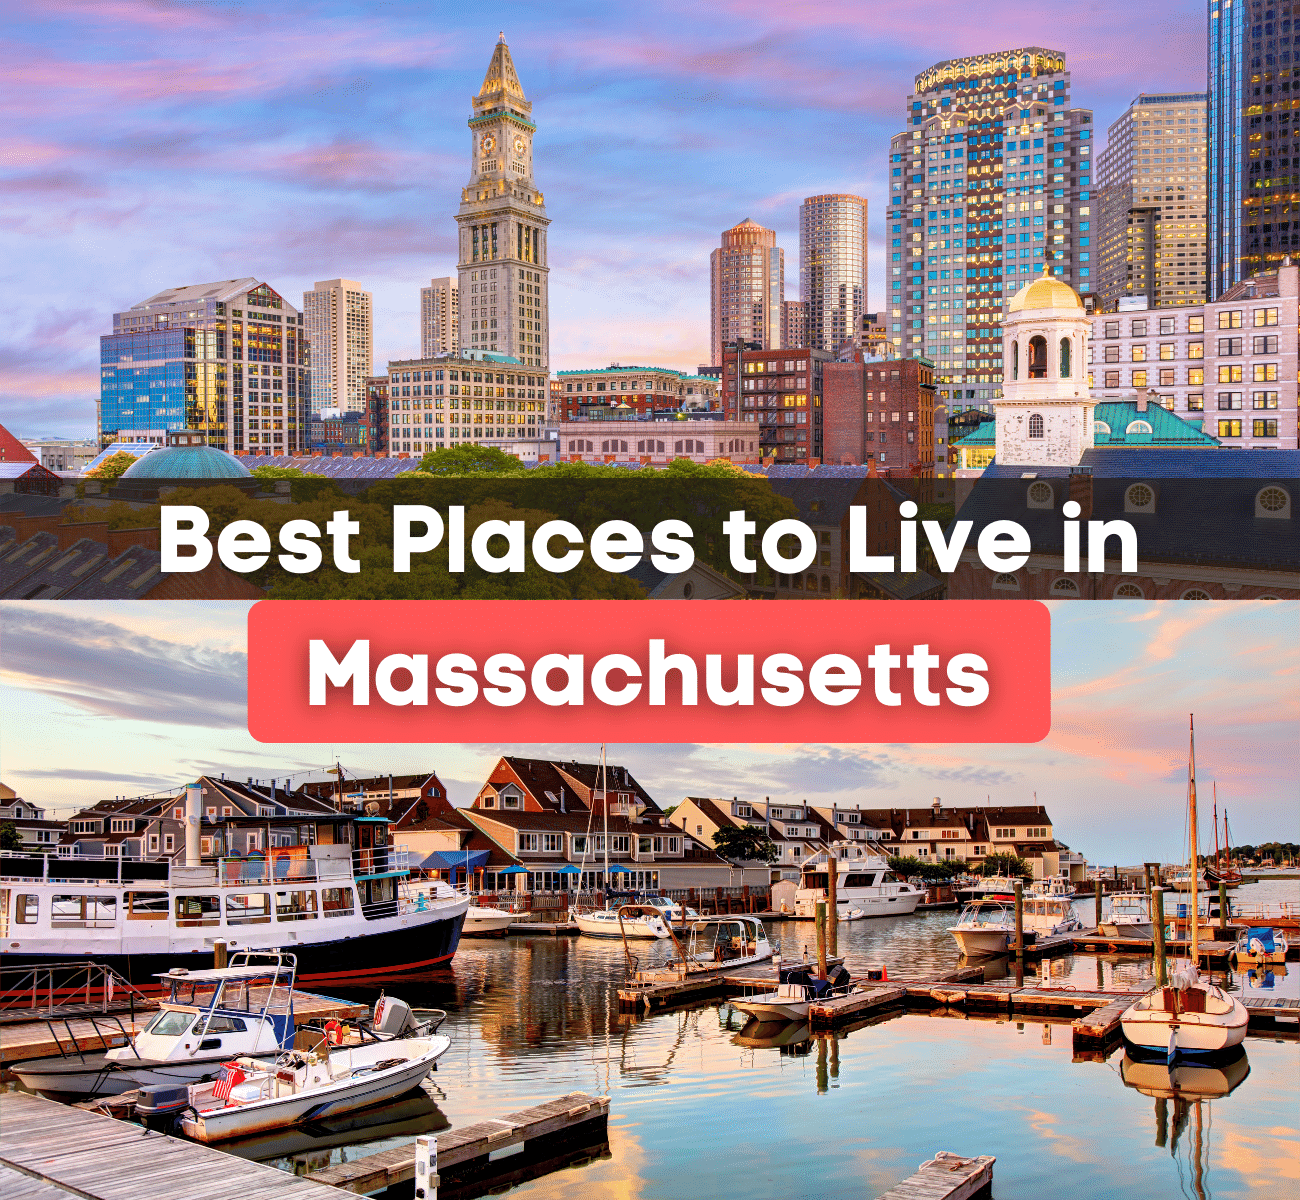 Best Places to Live in the State of Massachusetts - Best cities to live in MA